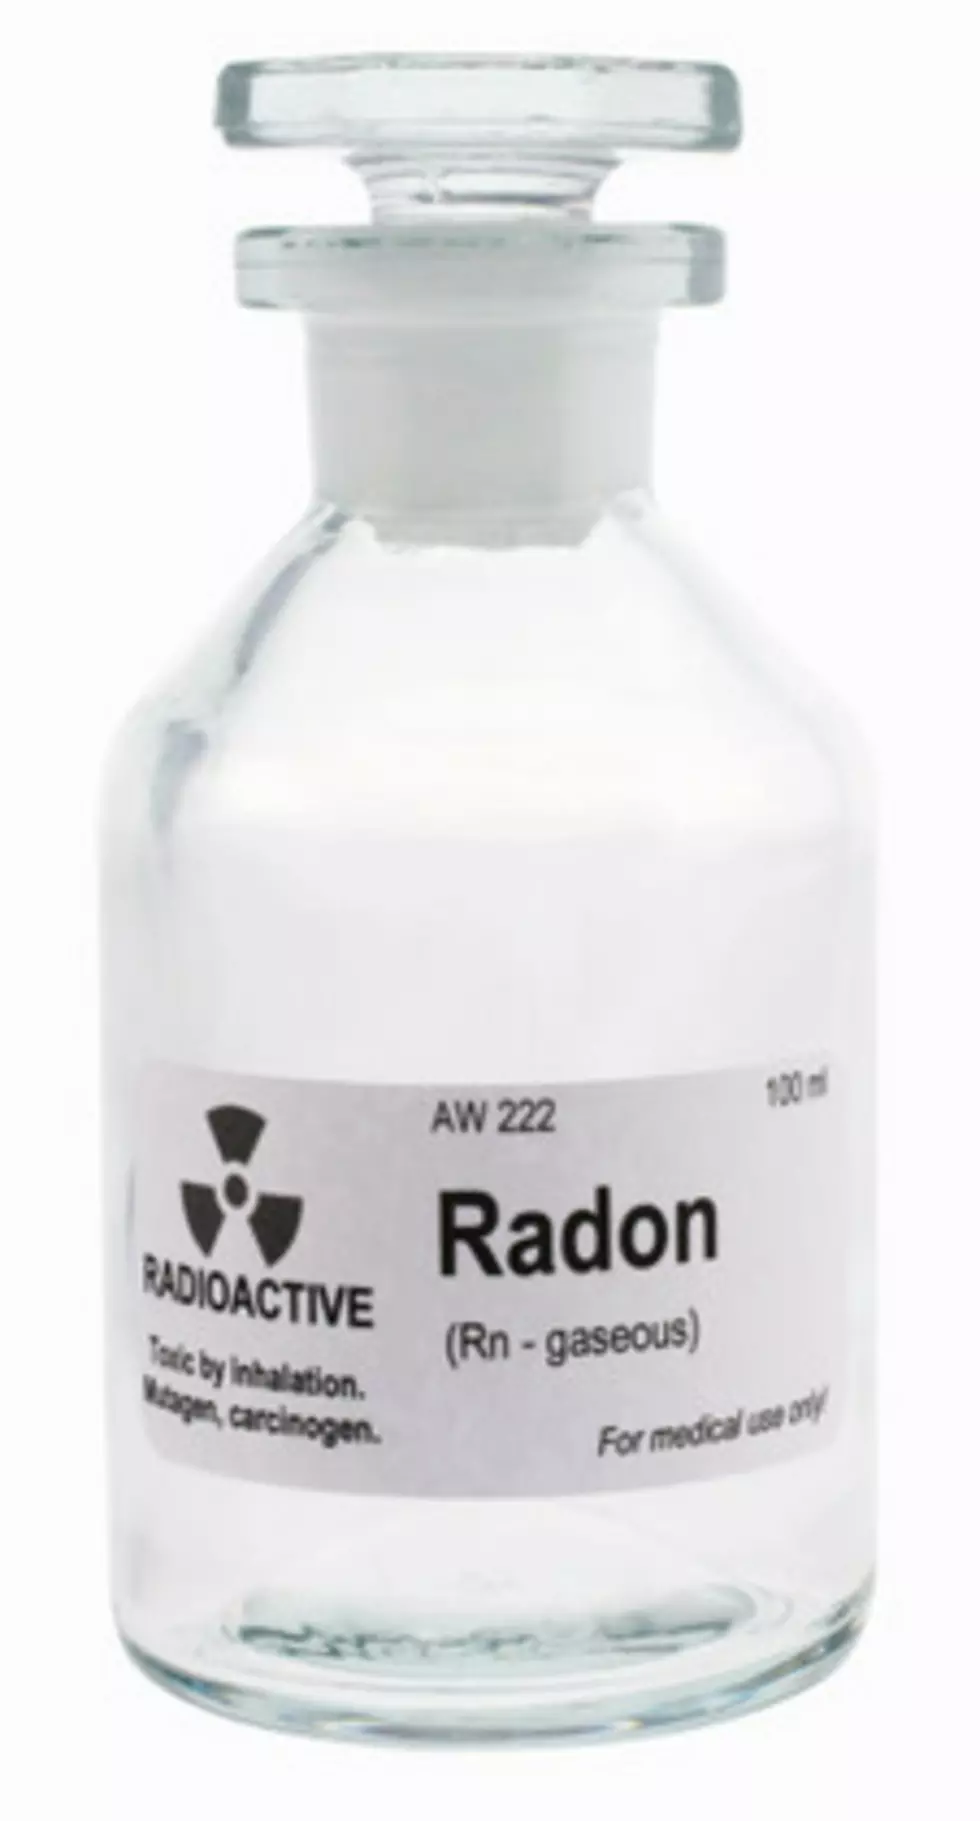 Free Radon Test Kits For Barry and Eaton Counties